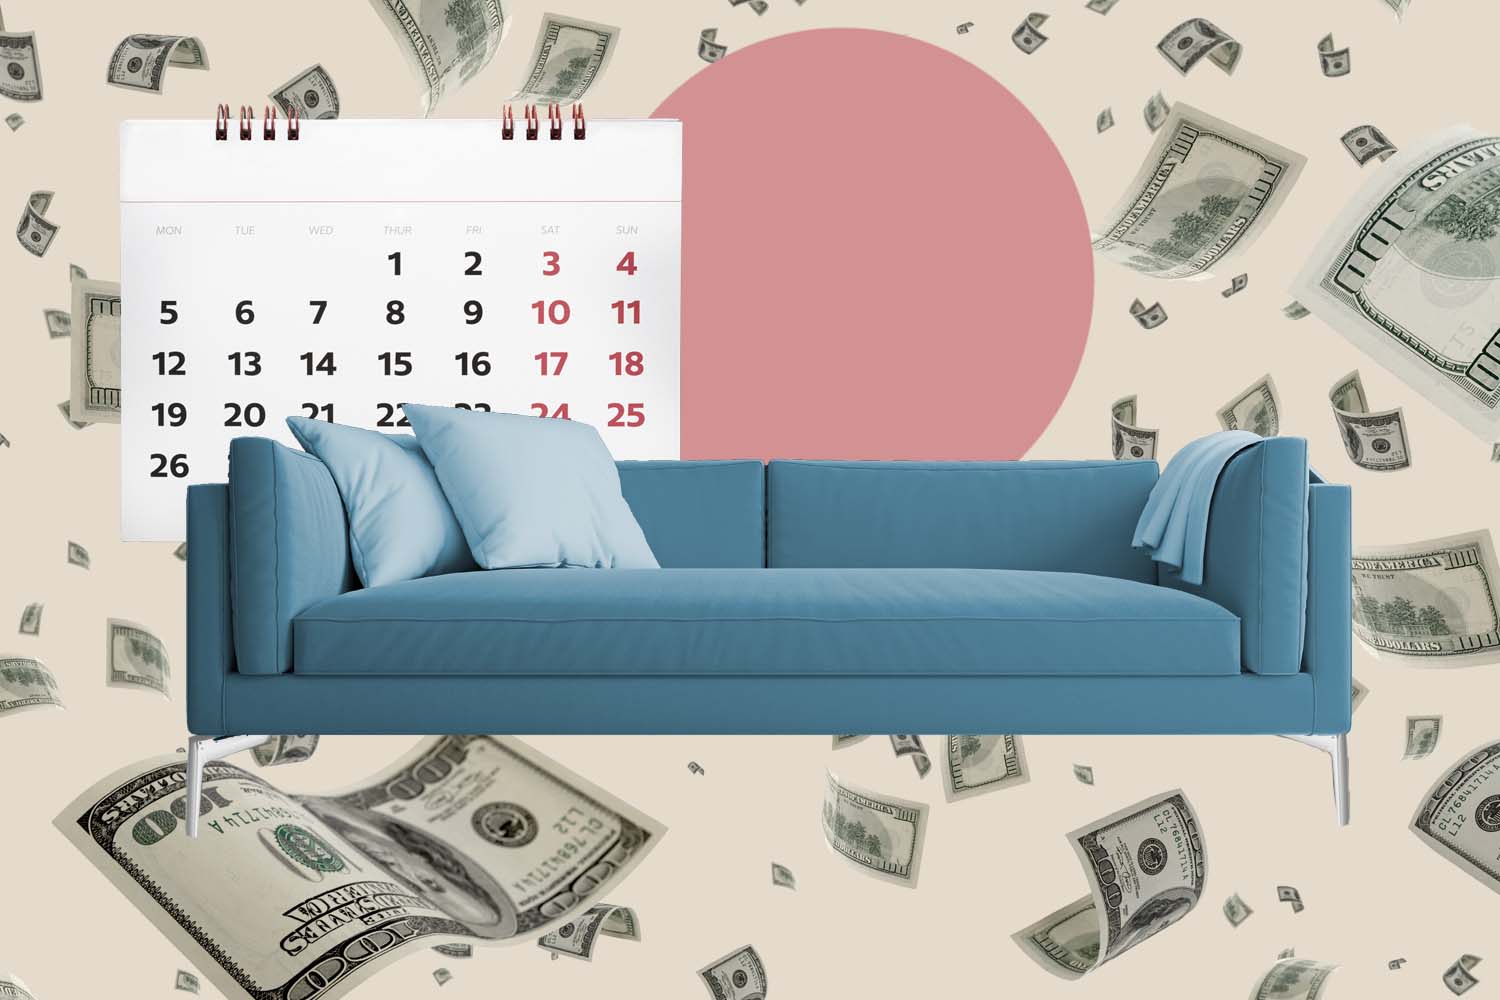 Collage of a couch, calendar and money